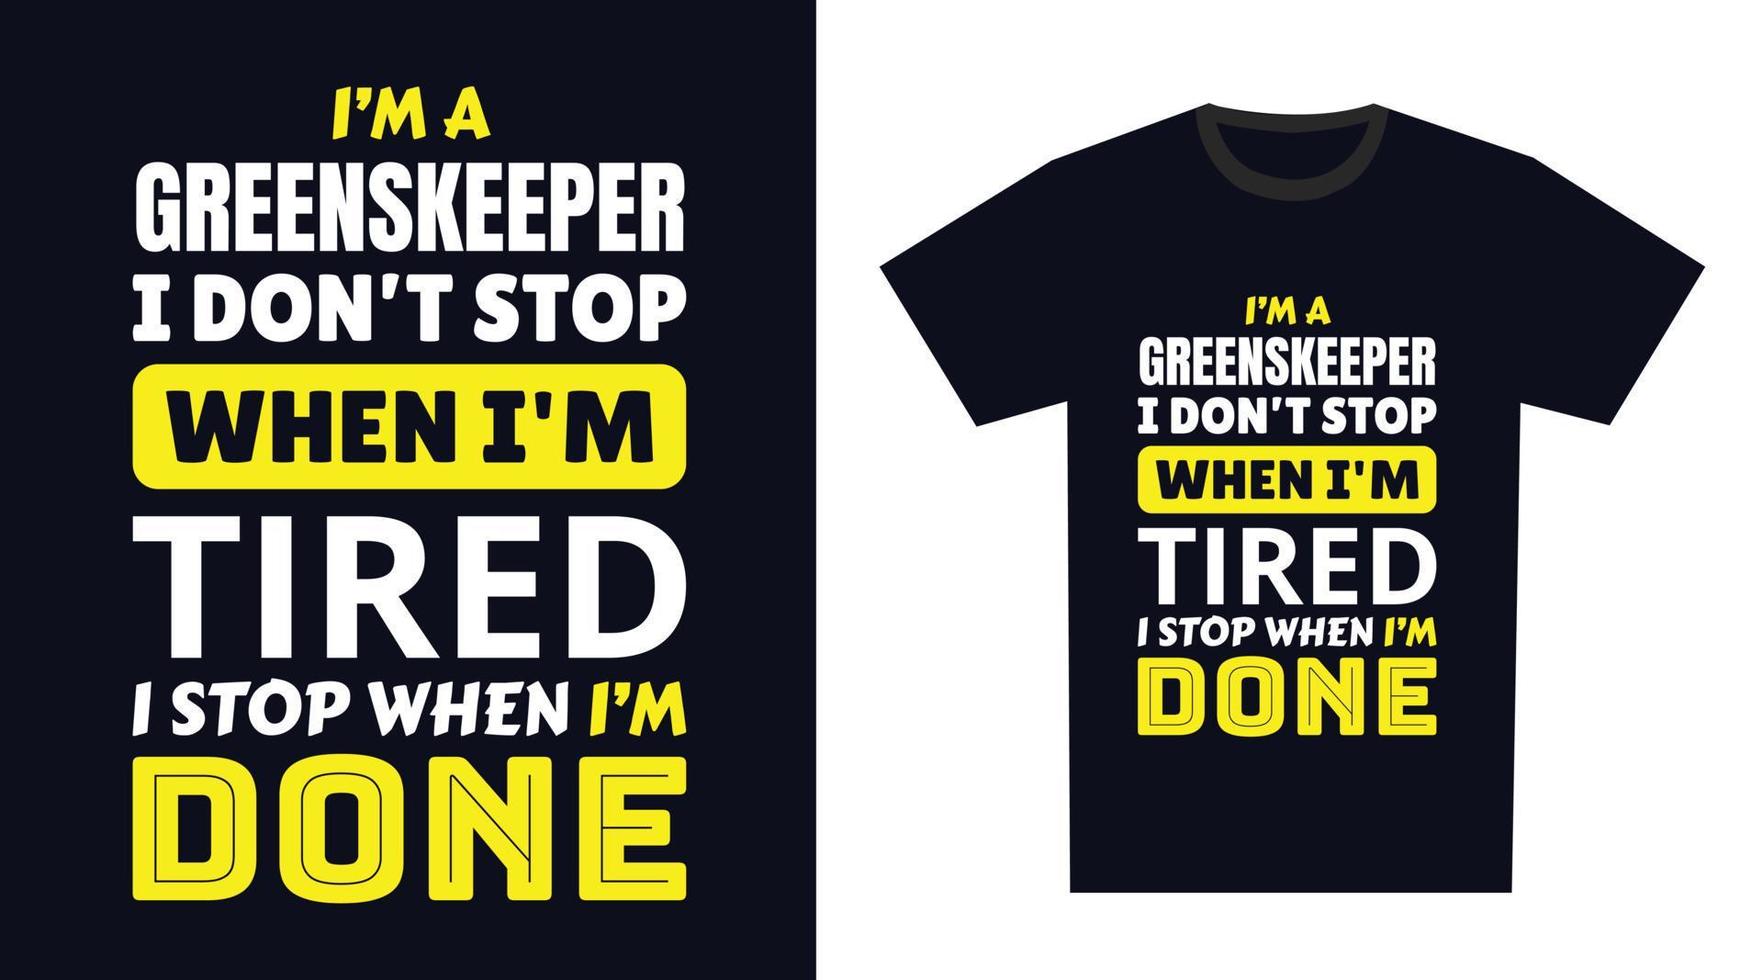 Greenskeeper T Shirt Design. I 'm a Greenskeeper I Don't Stop When I'm Tired, I Stop When I'm Done vector